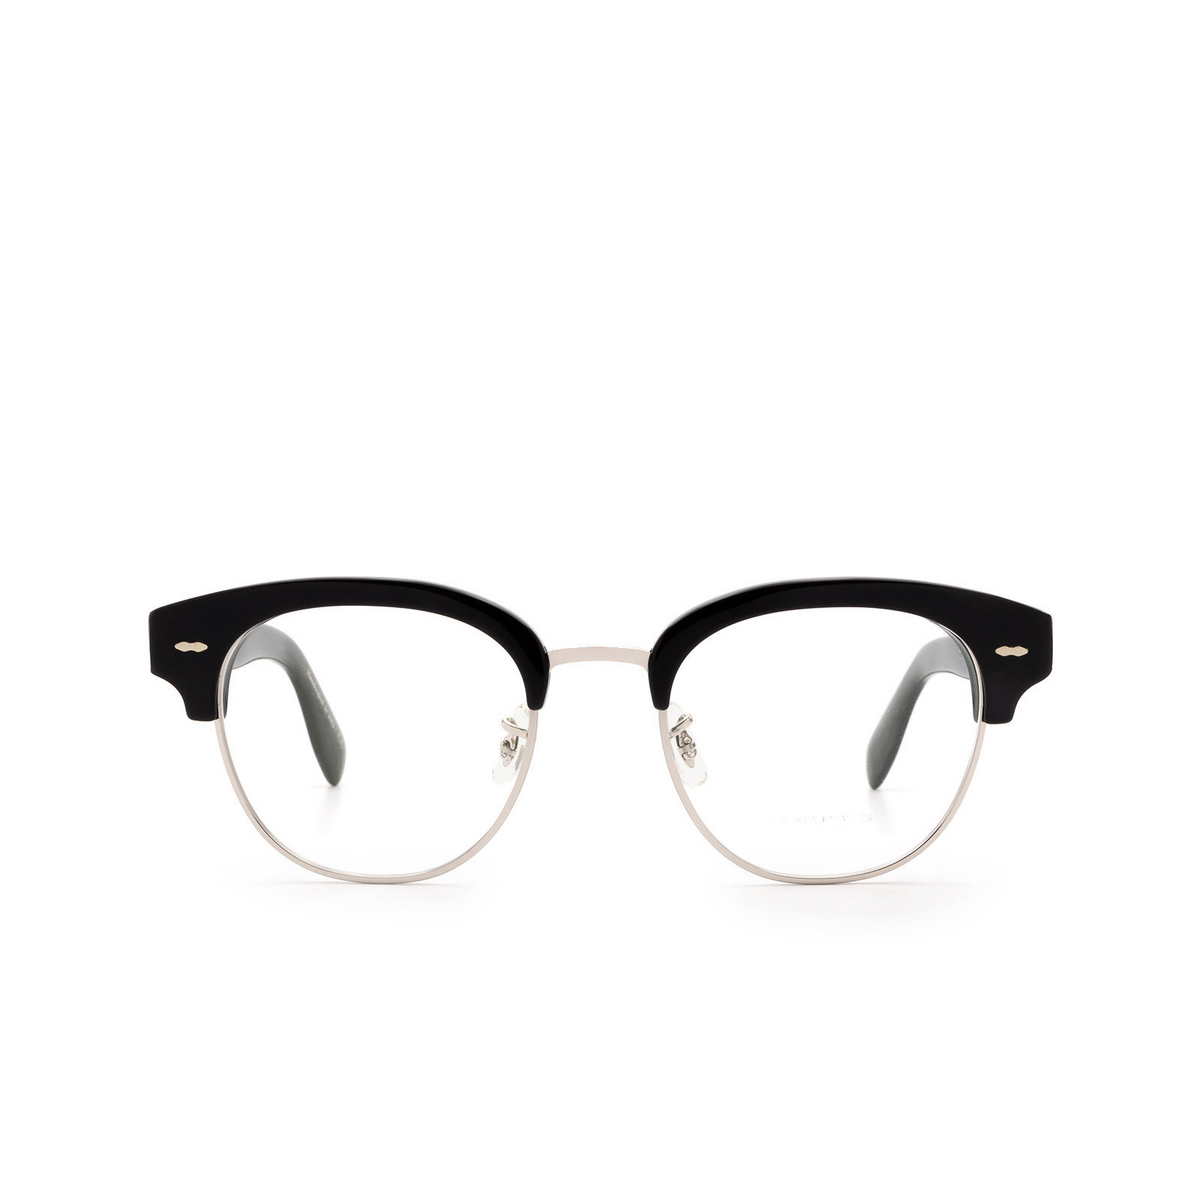 Oliver Peoples CARY GRANT 2 Eyeglasses 1005 Black - front view